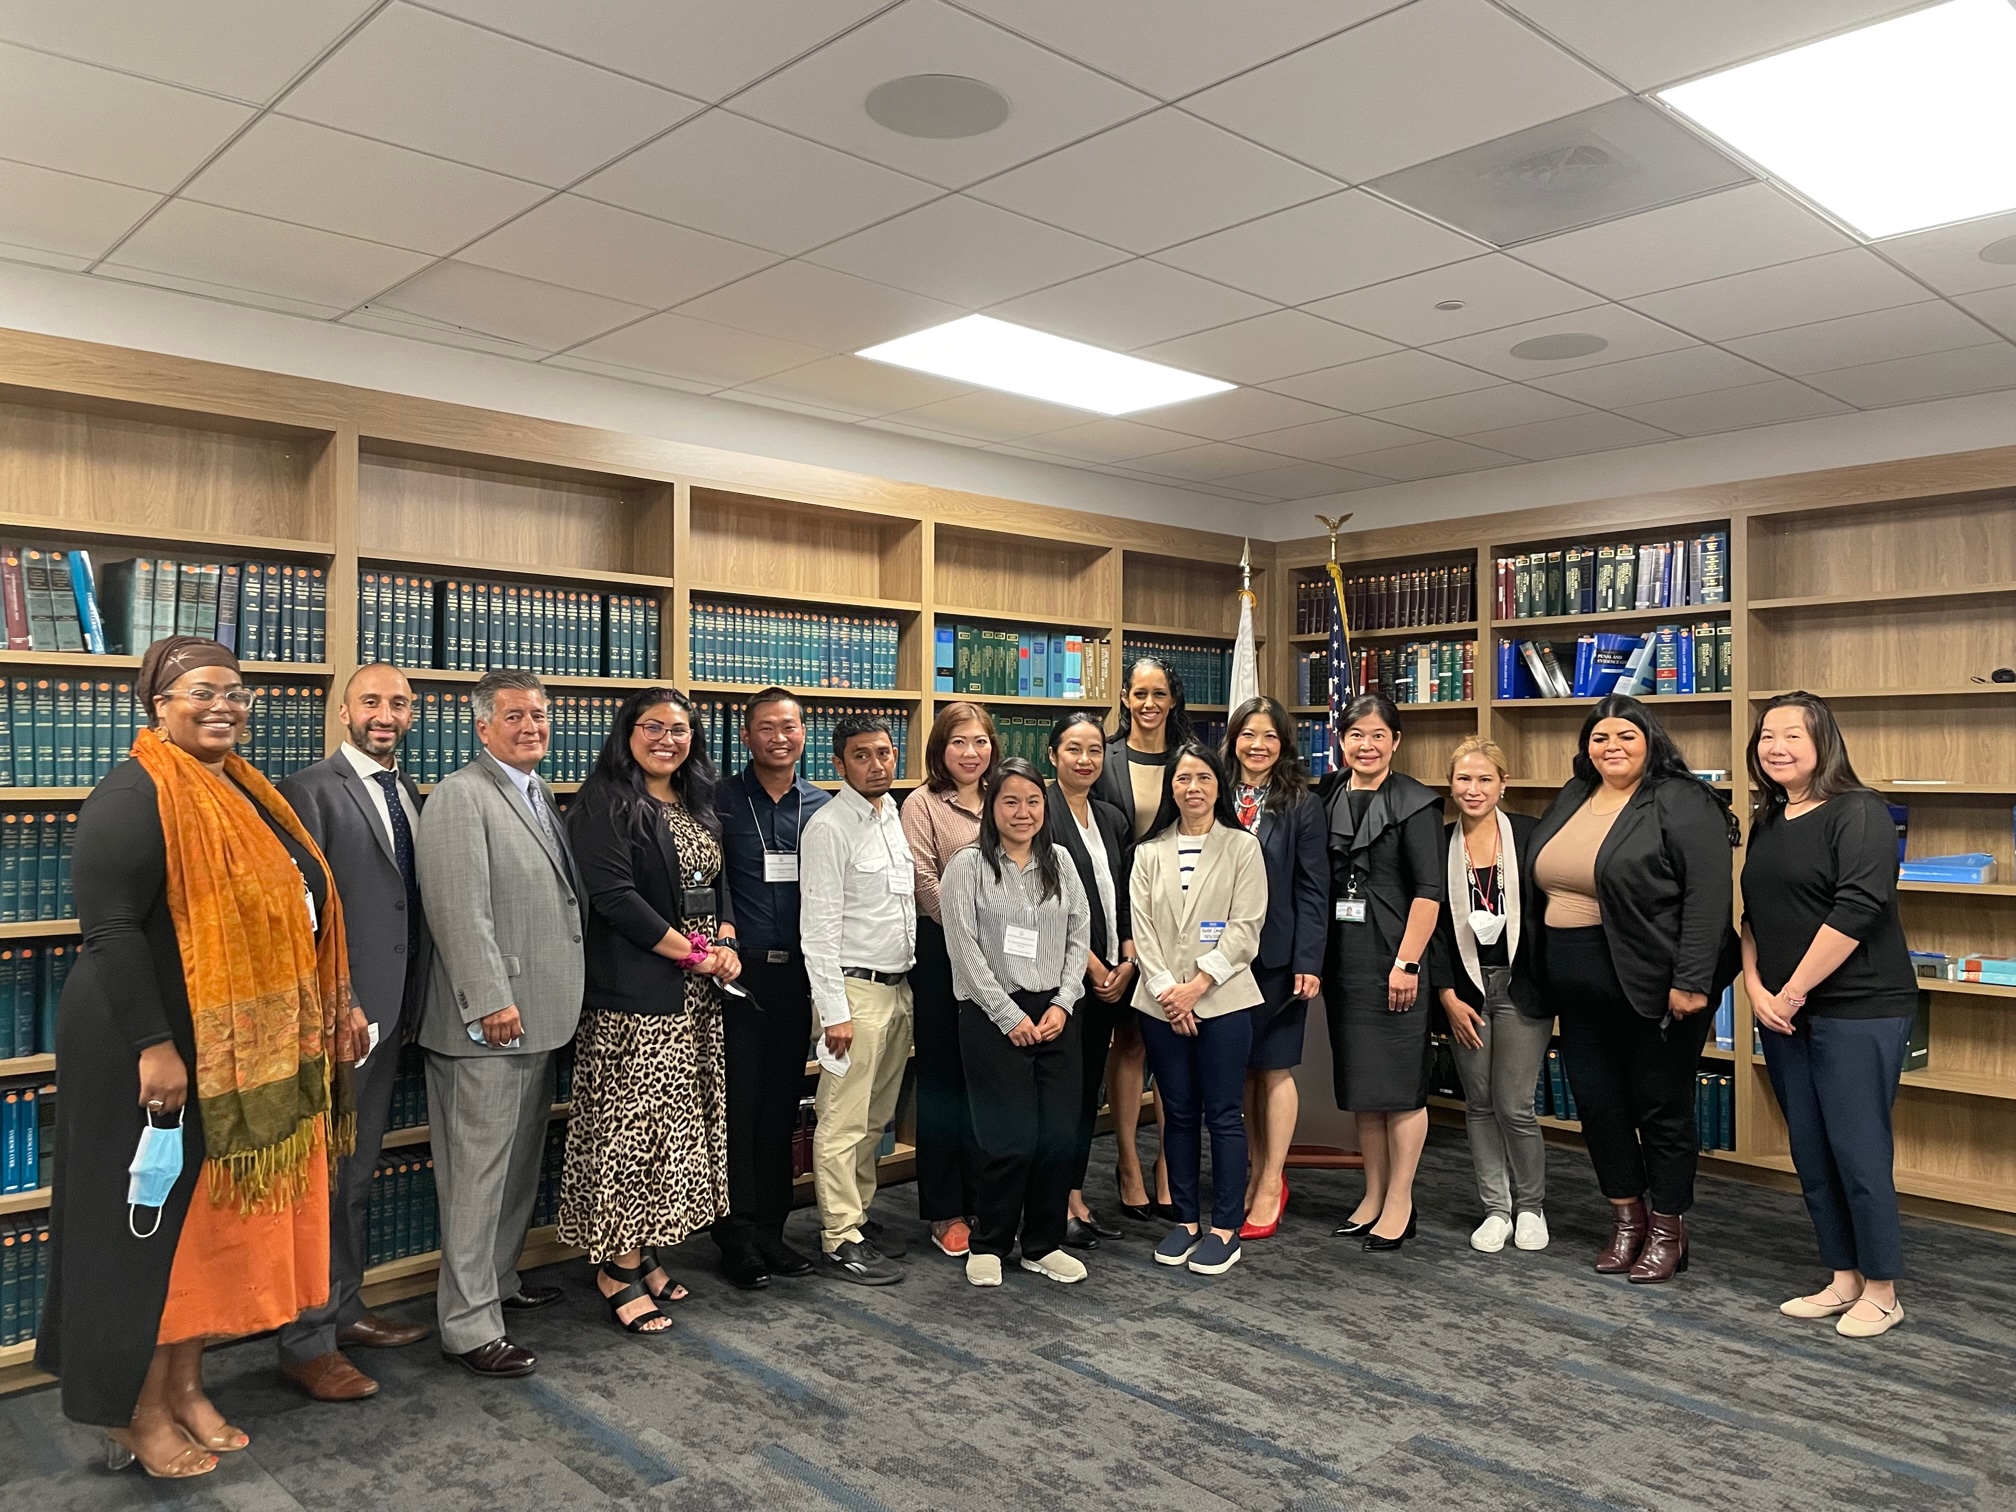 The Supporting Survivors of Sexual Assault IVLP group visited with the District Attorney's office in San Francisco, California.